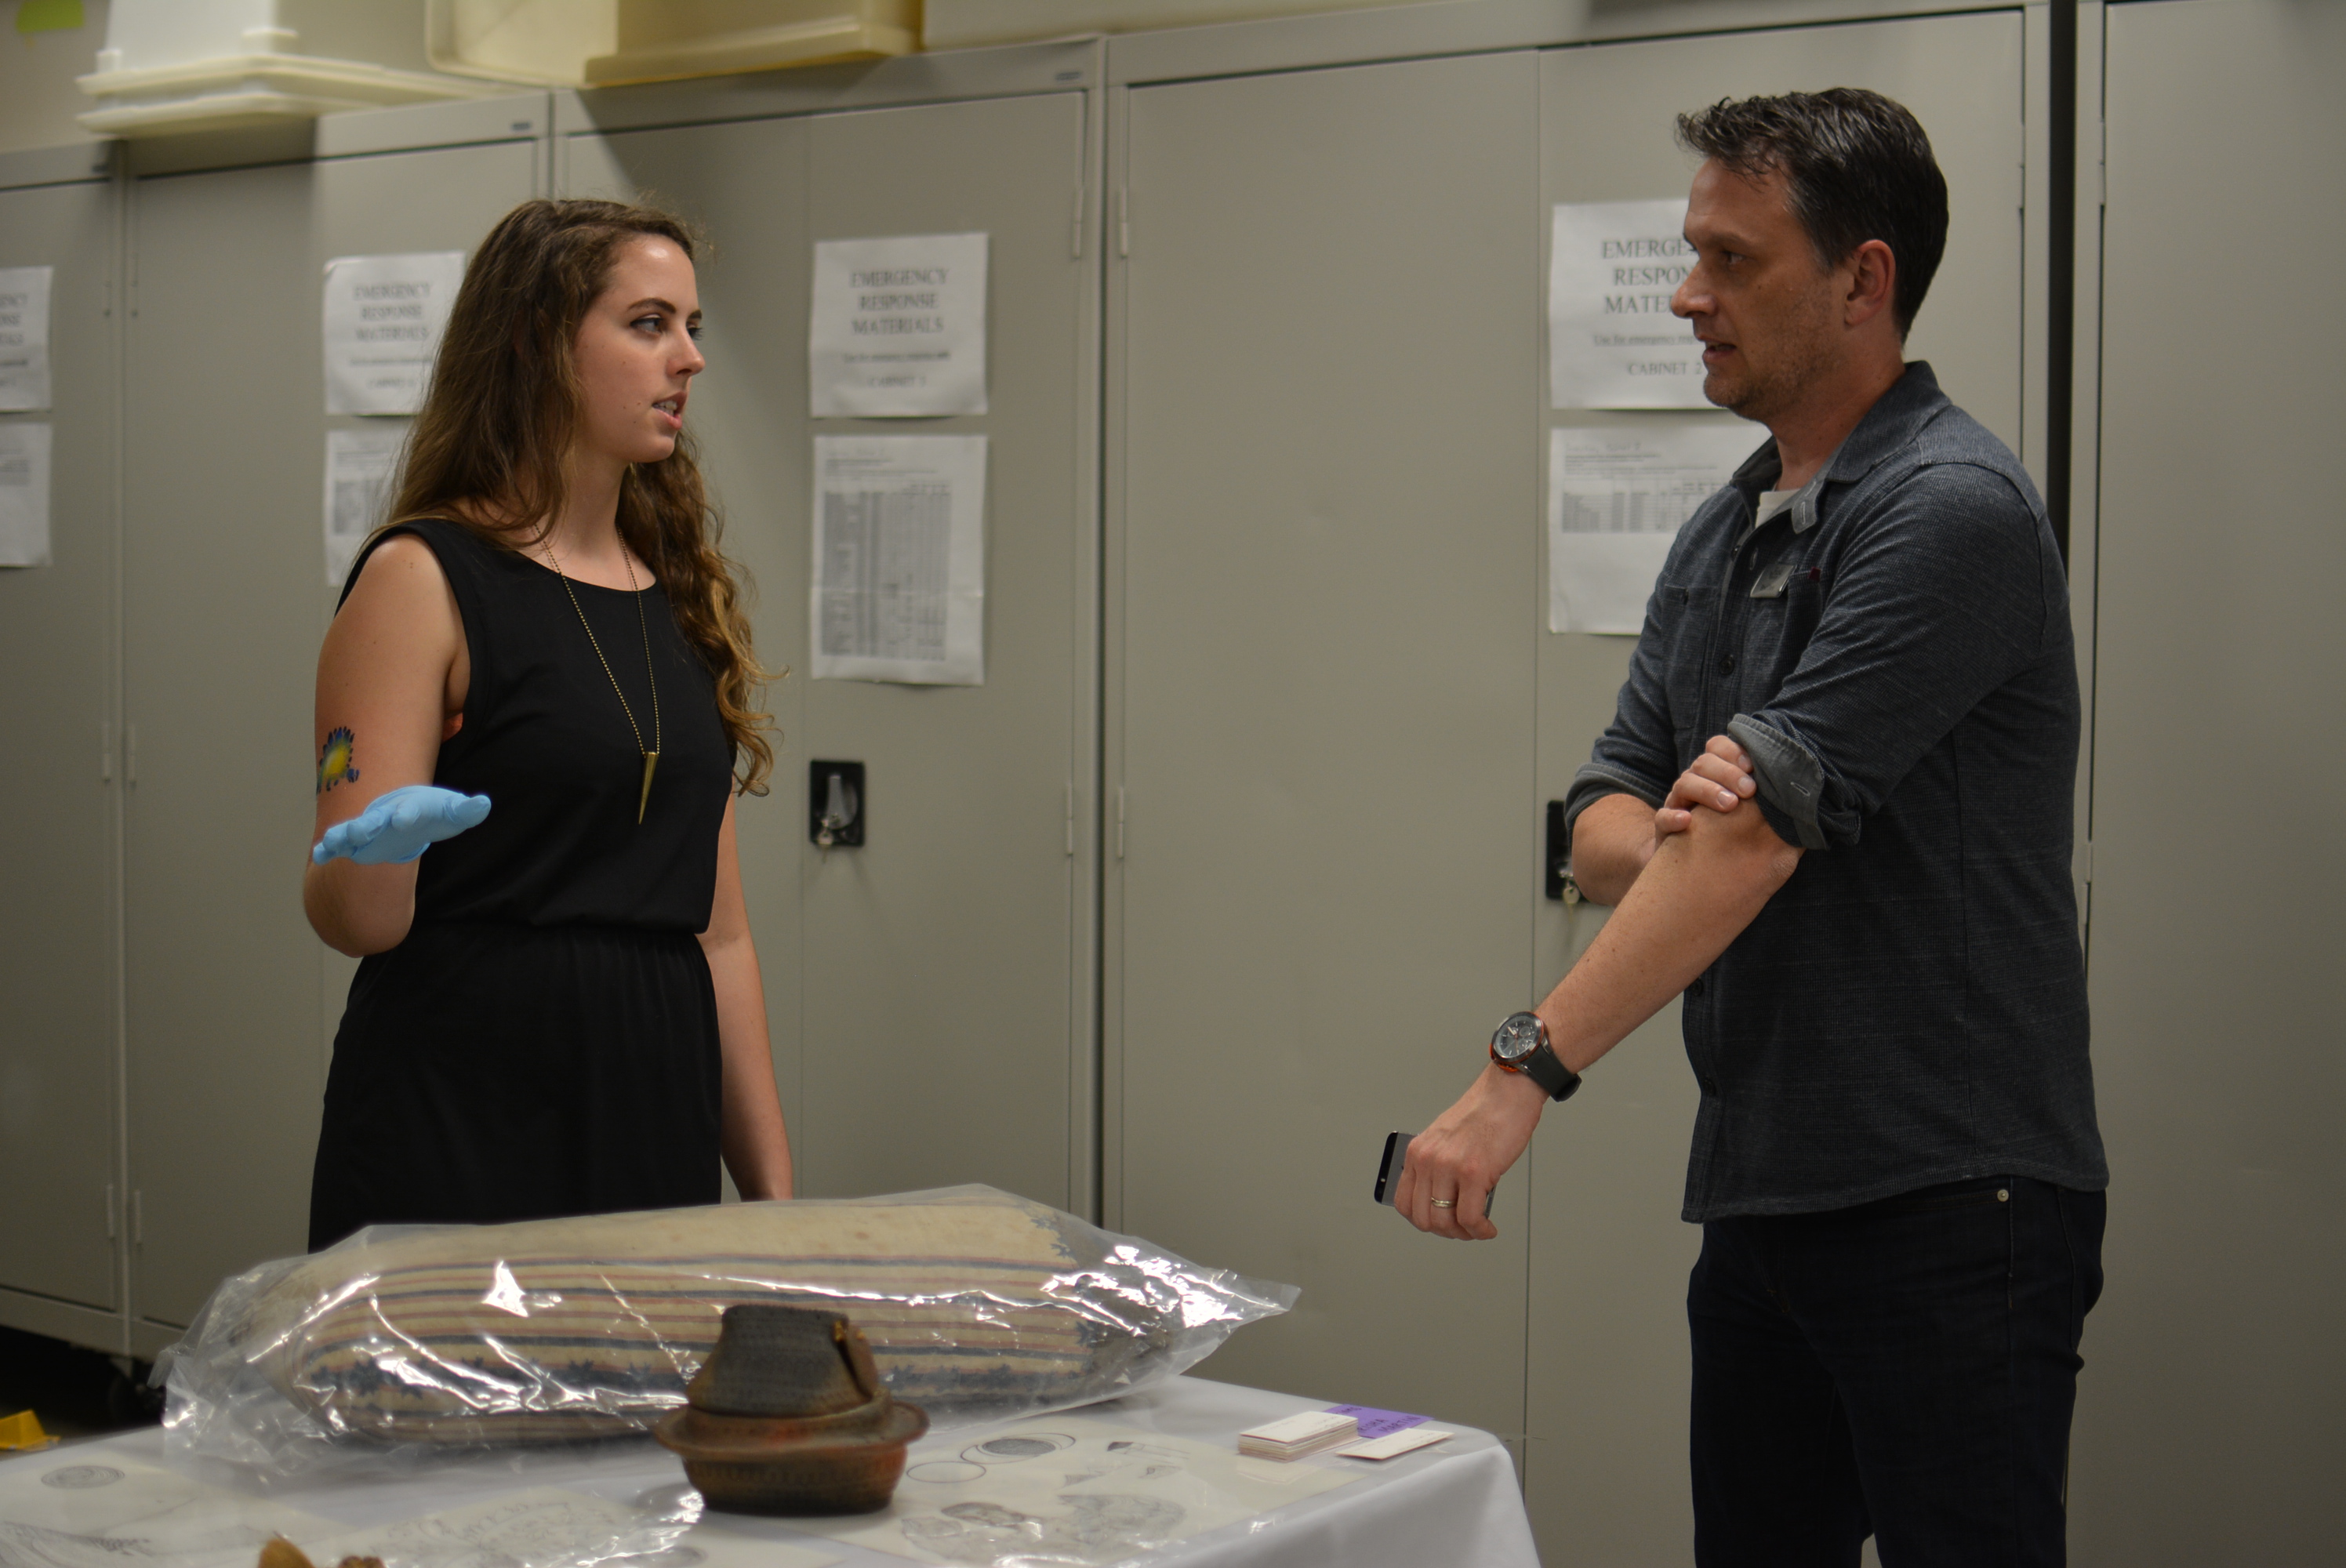 Cassie discussing co-curation with another Field Museum employee, Brad. (c) Field Museum of Natural History - CC BY-NC 4.0